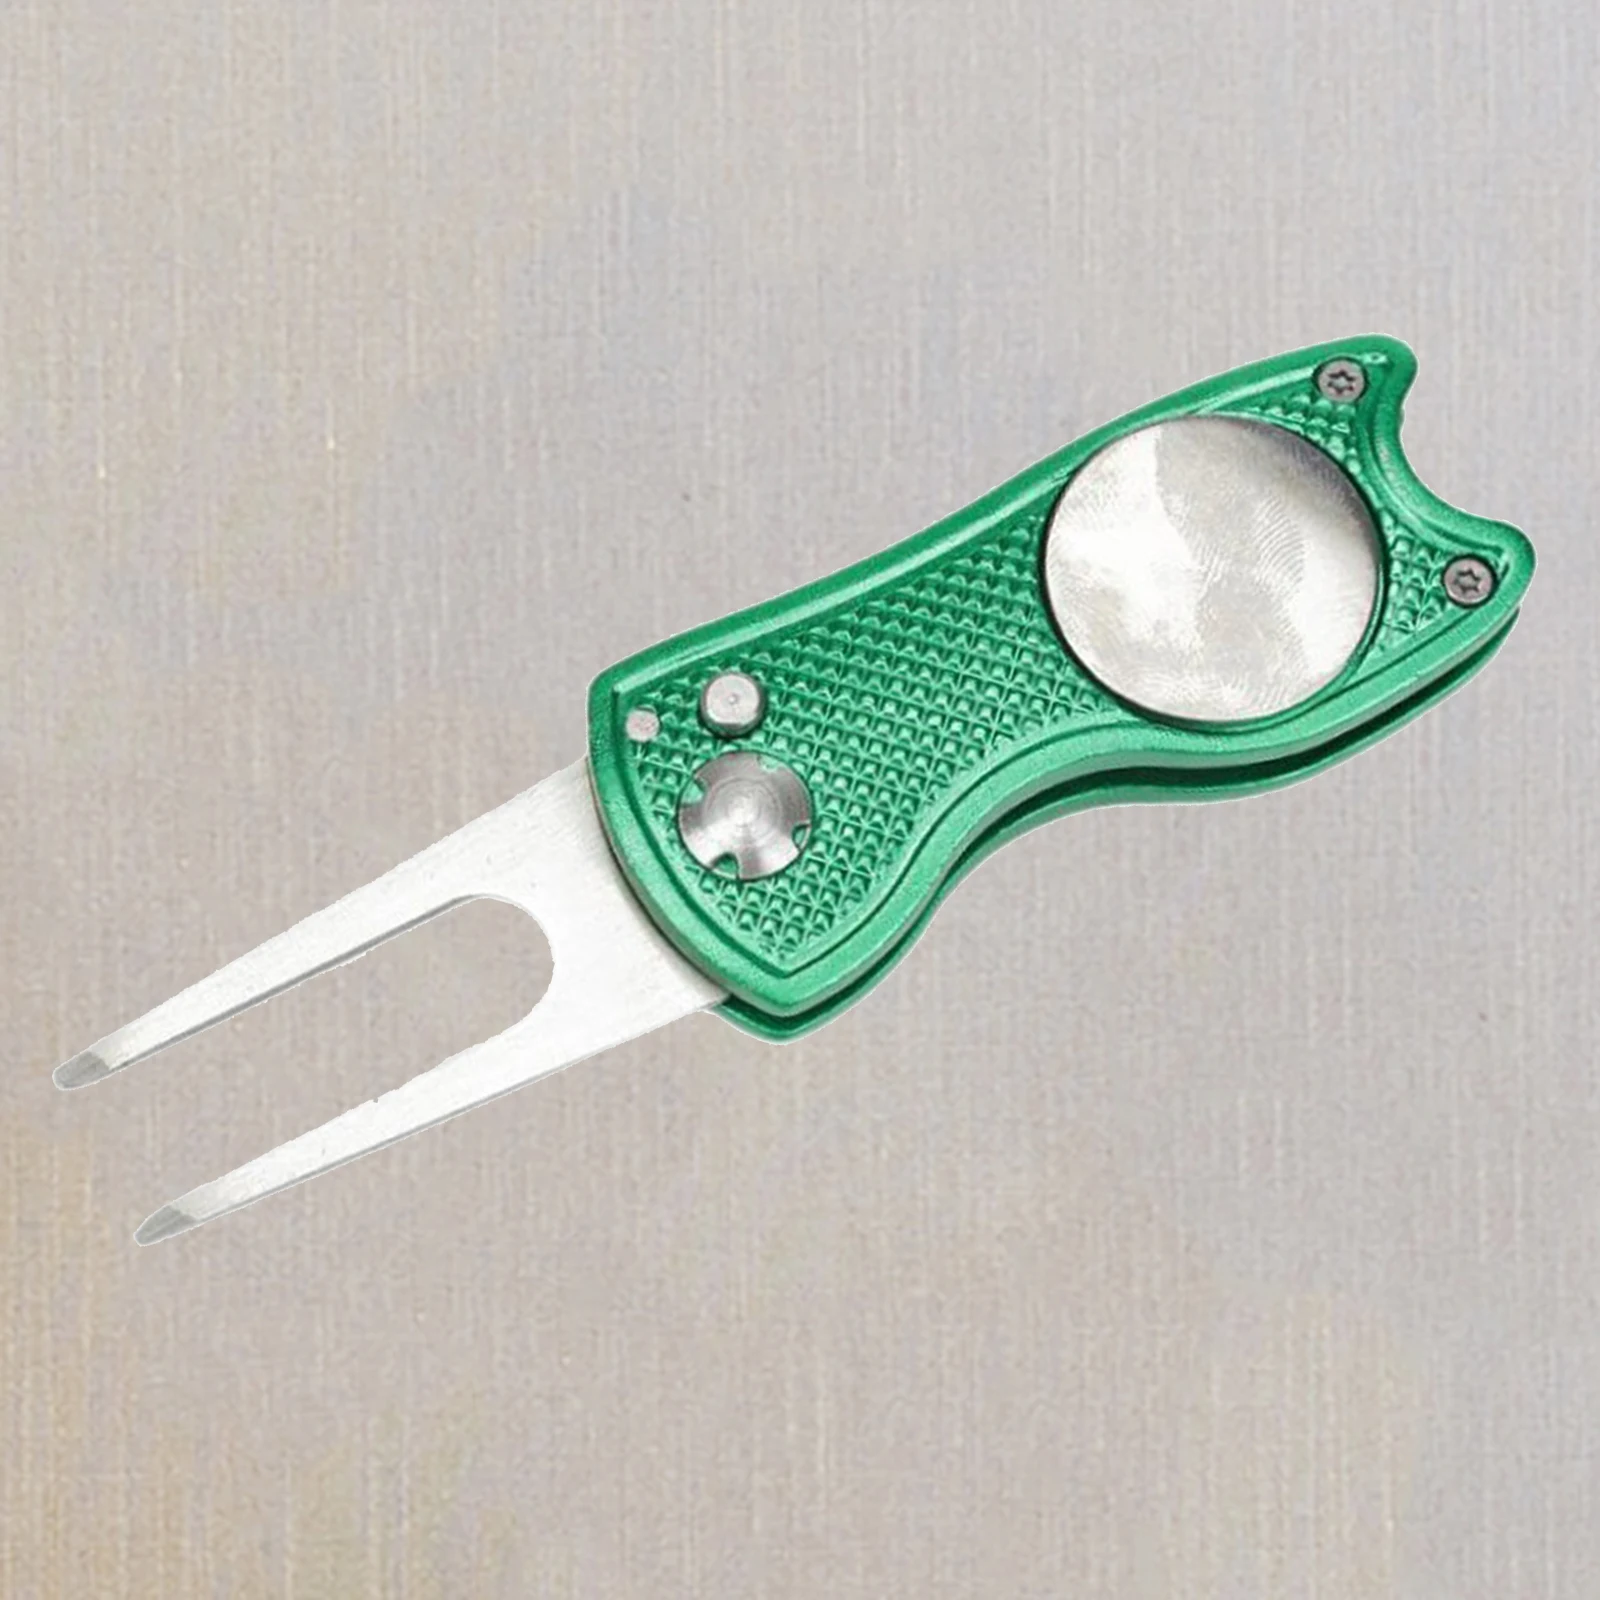 Foldable Golf Divot Tool with Golf Ball Tool Marker Pitch Cleaner Golf Pitchfork Golf Accessories Putting Green Fork